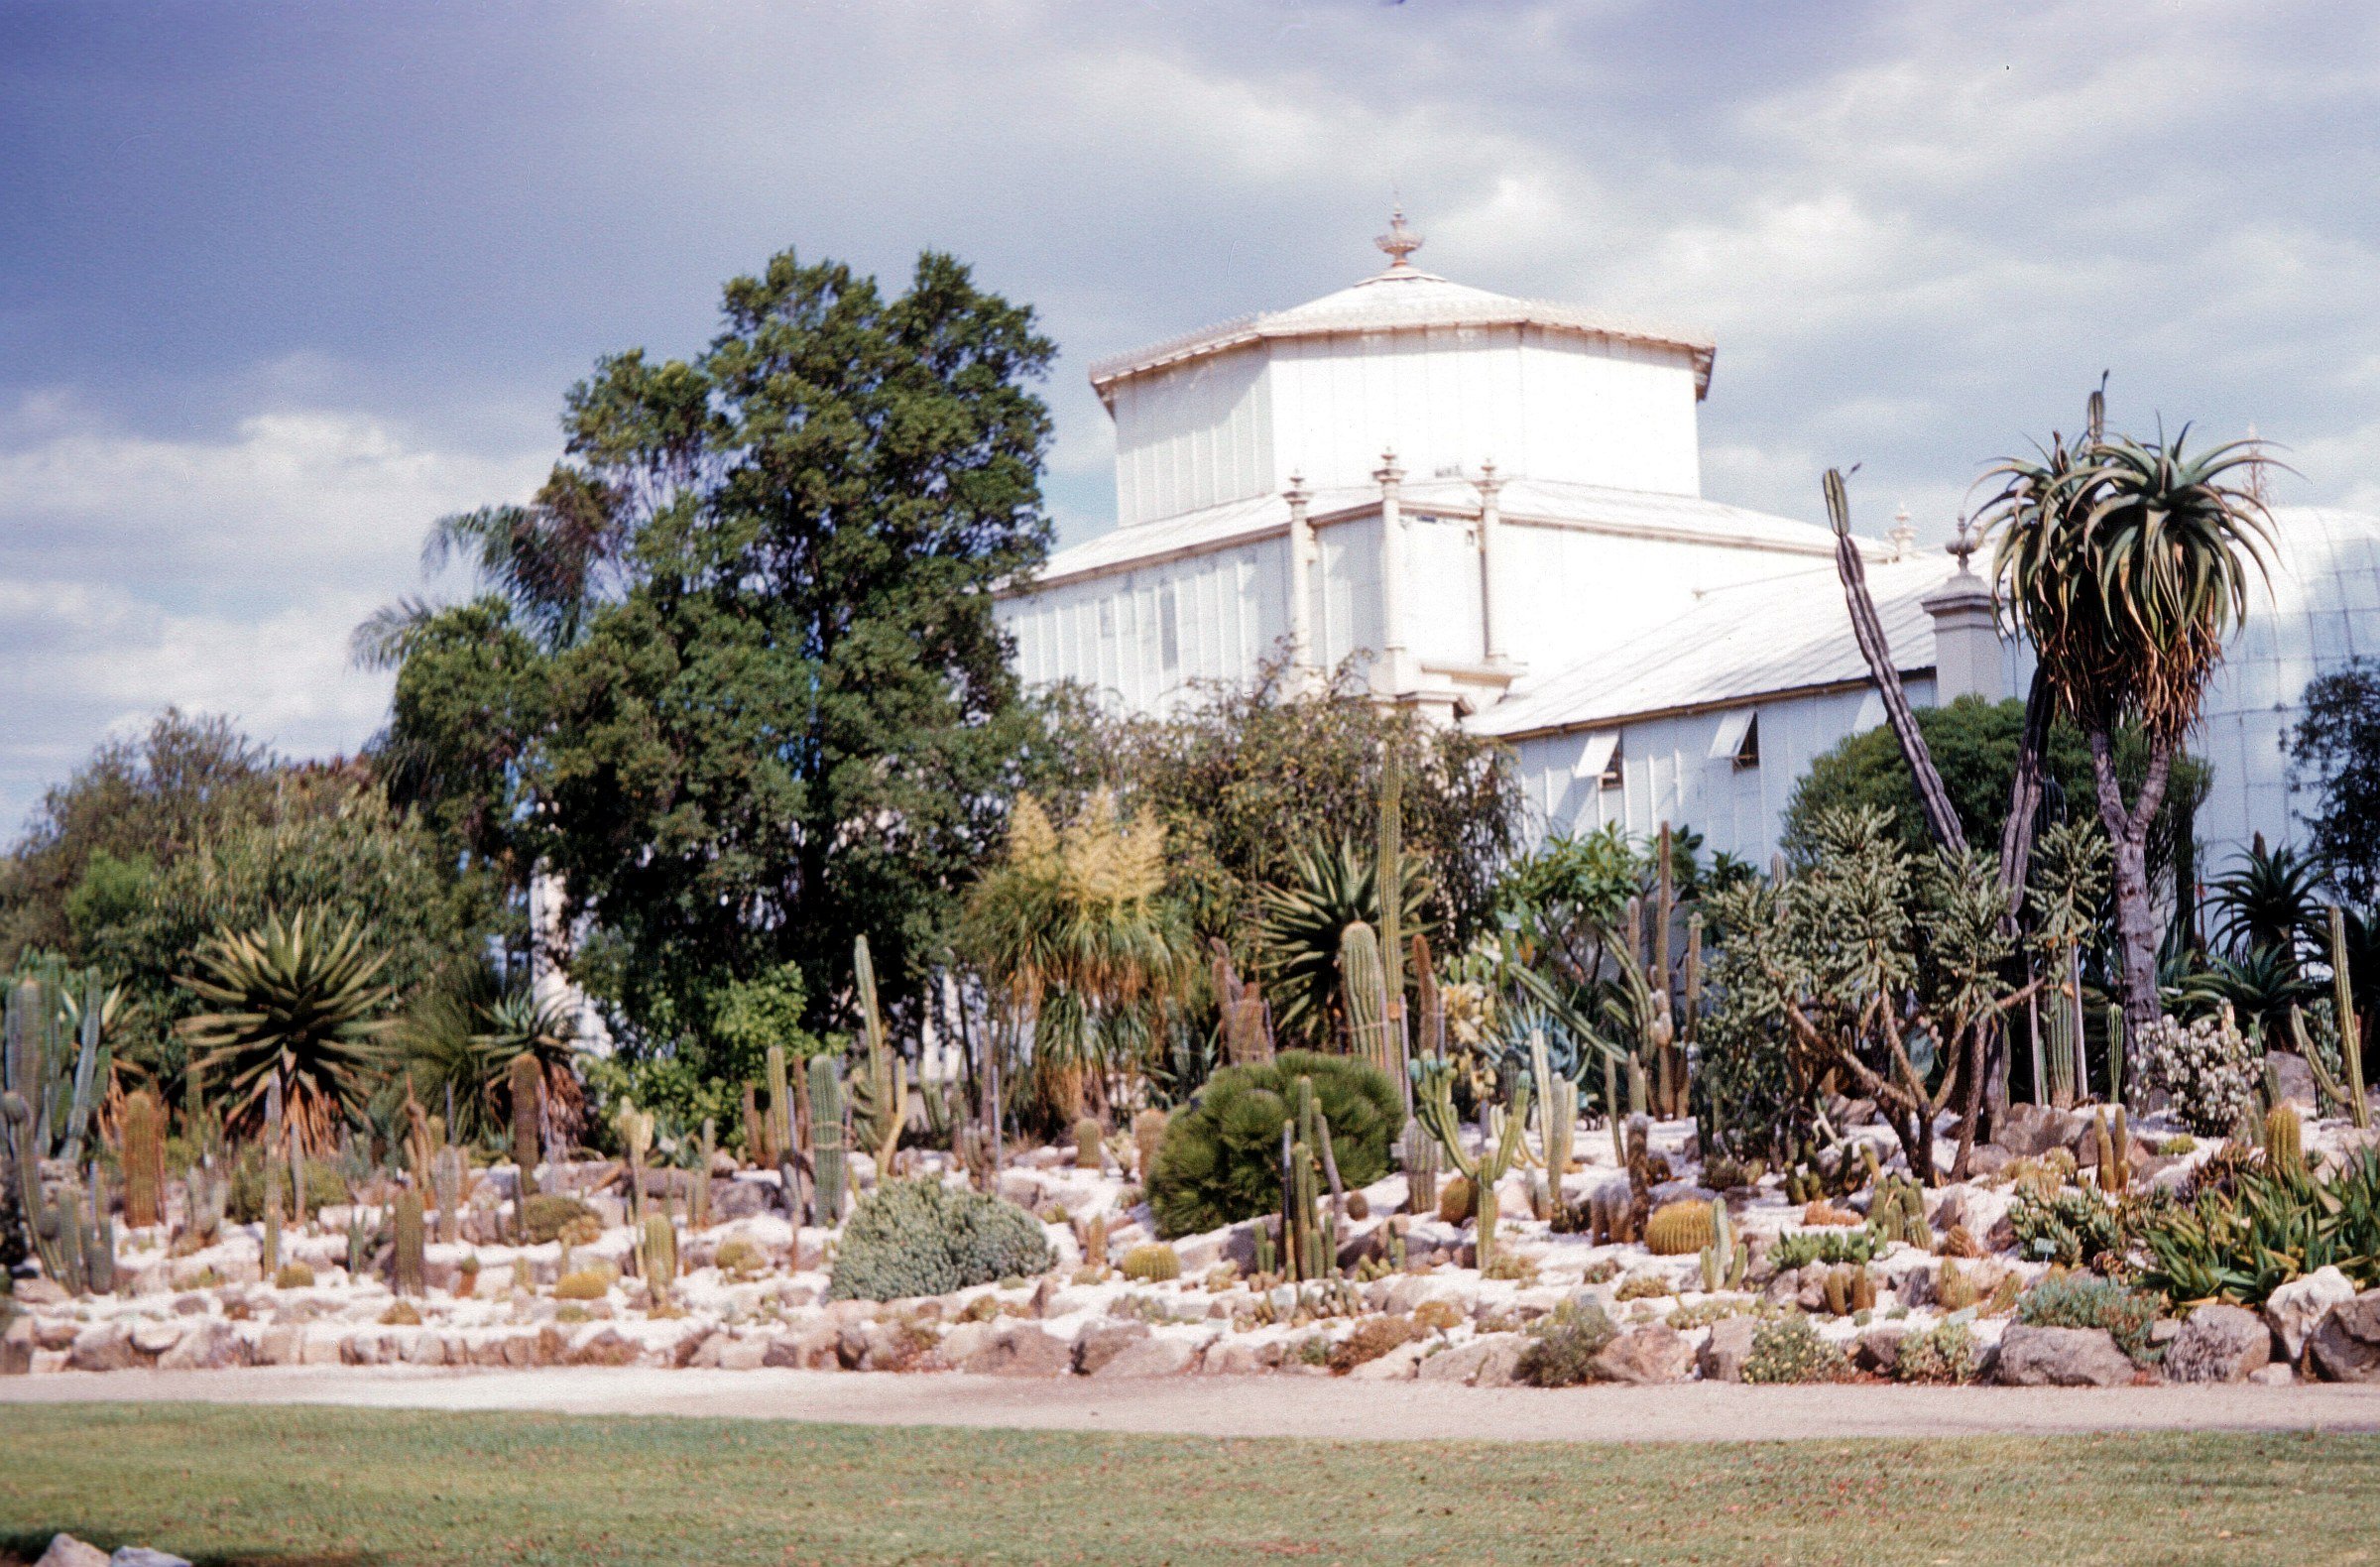 Adelaide Botanic Garden:  The 1877 Palm House, neglected in 1961 